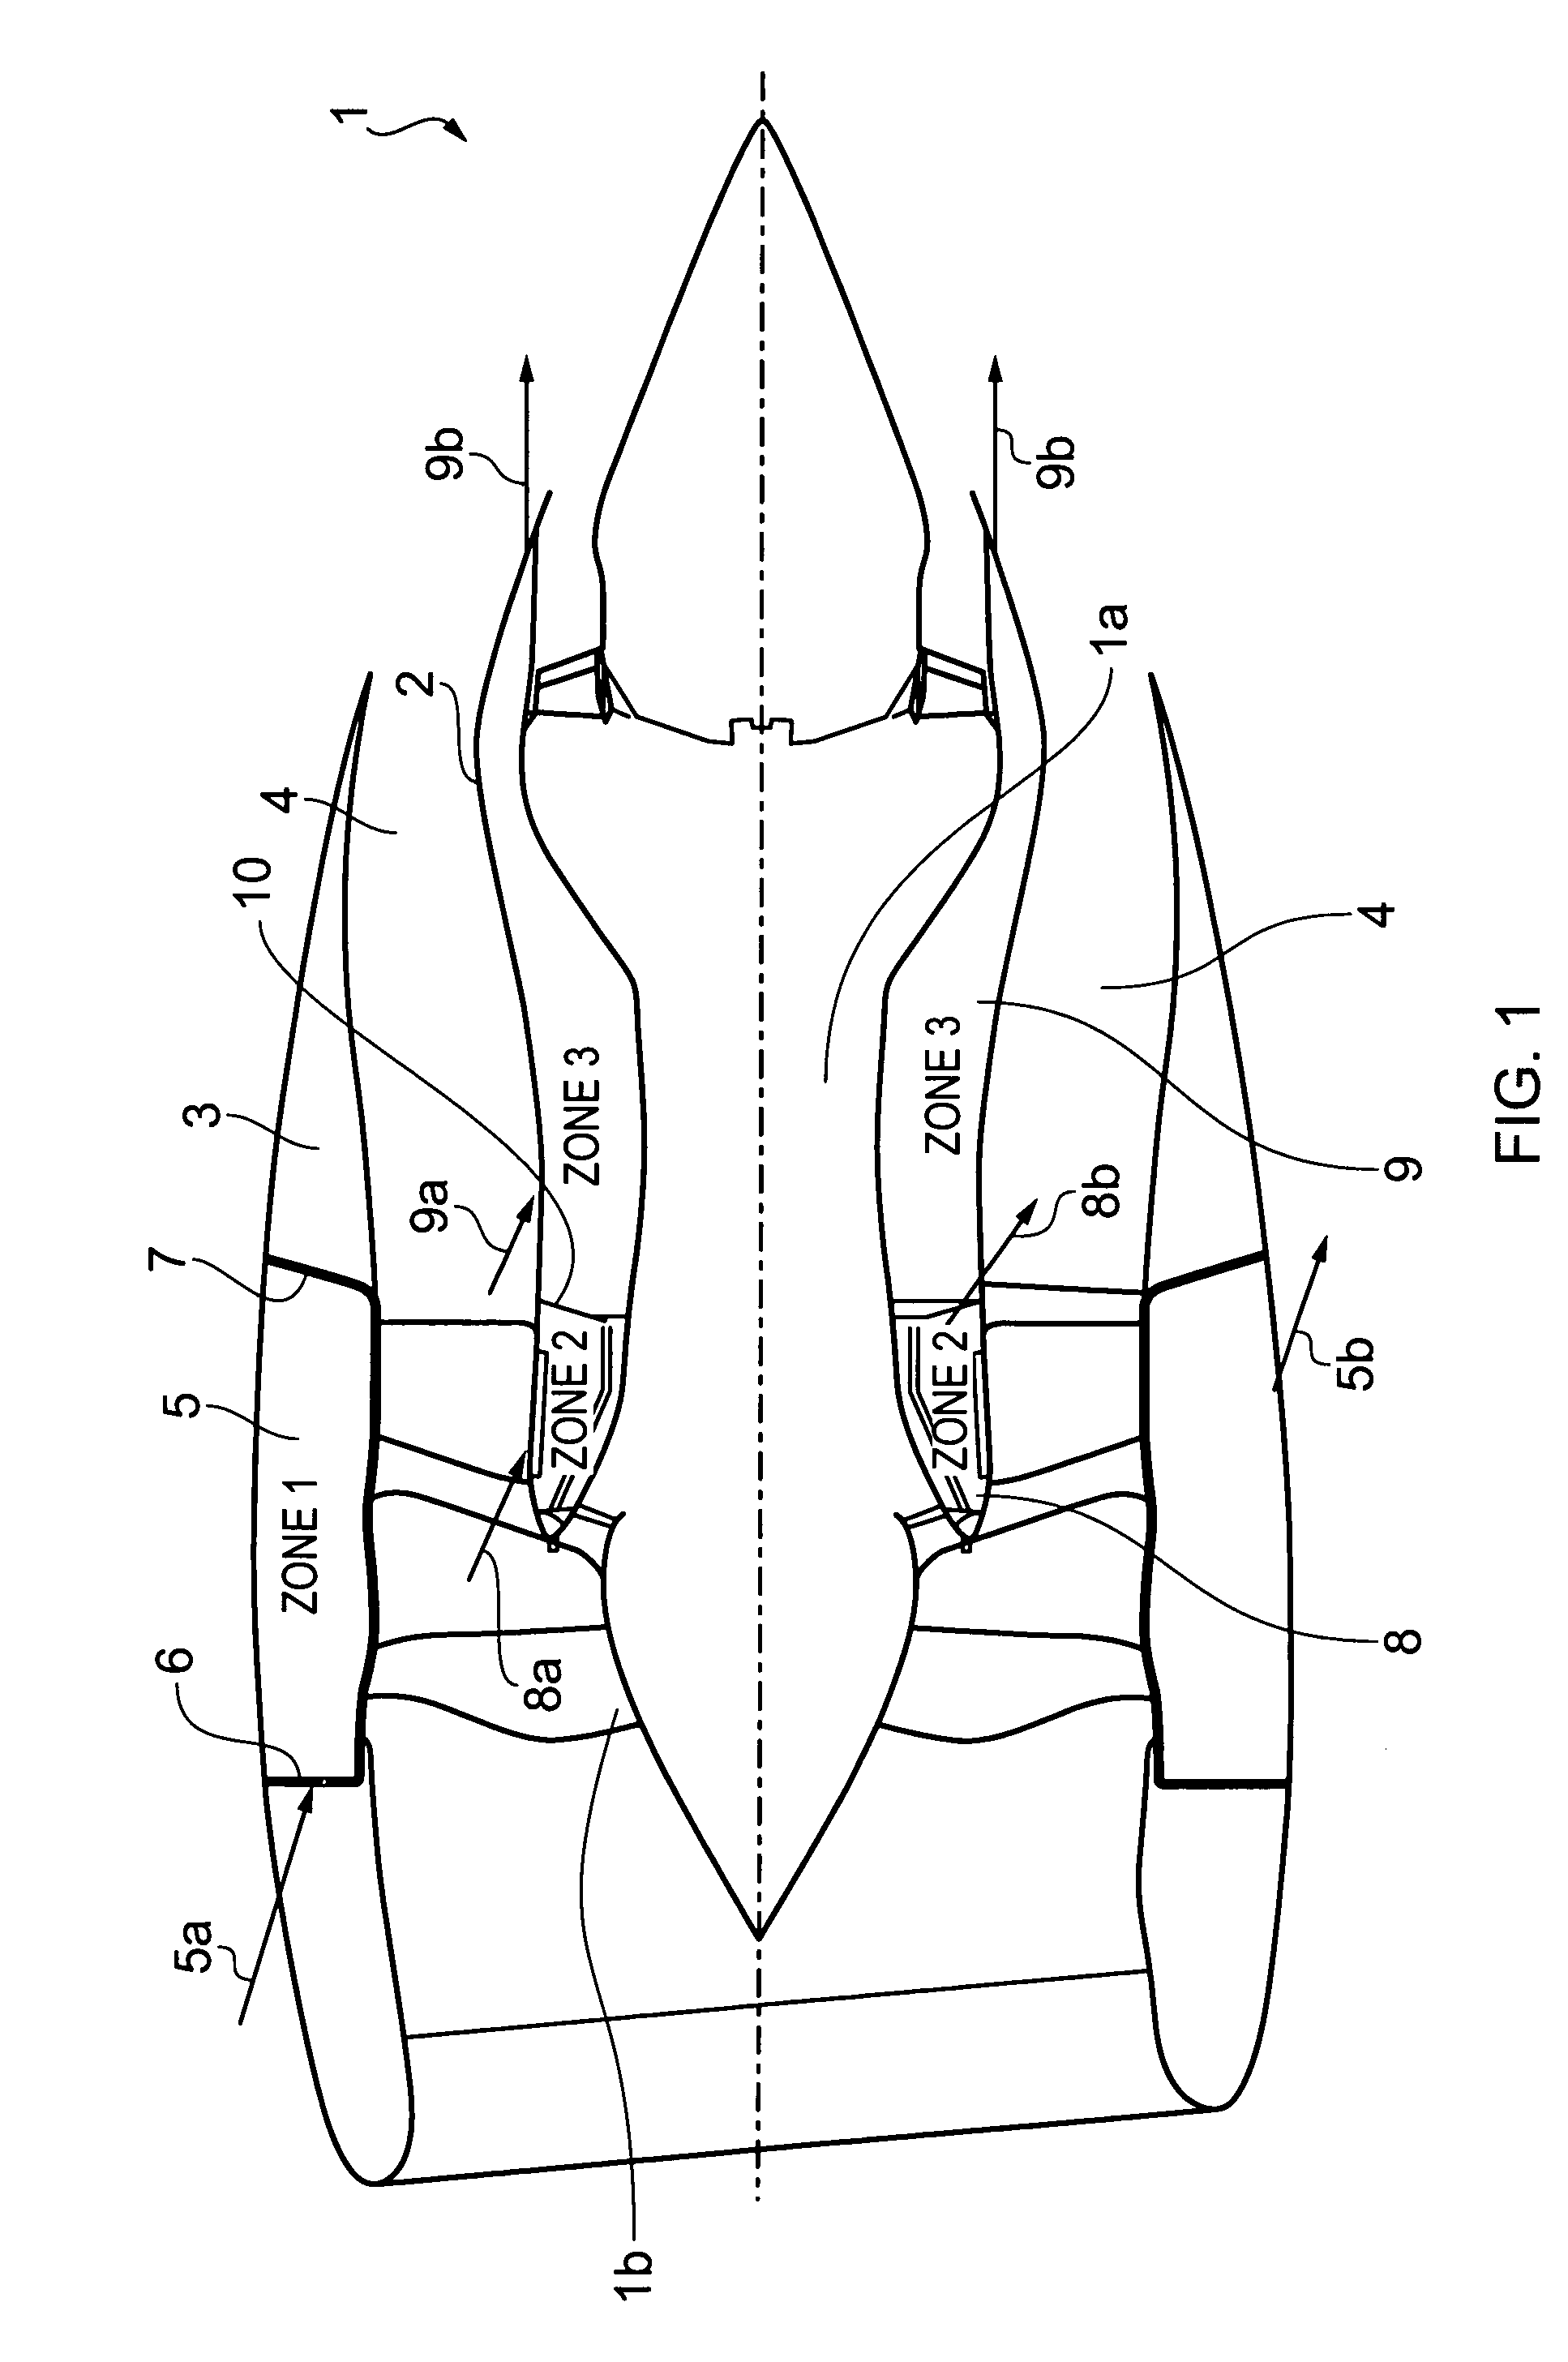 Method for detecting overpressure inside a compartment associated with a gas turbine nacelle